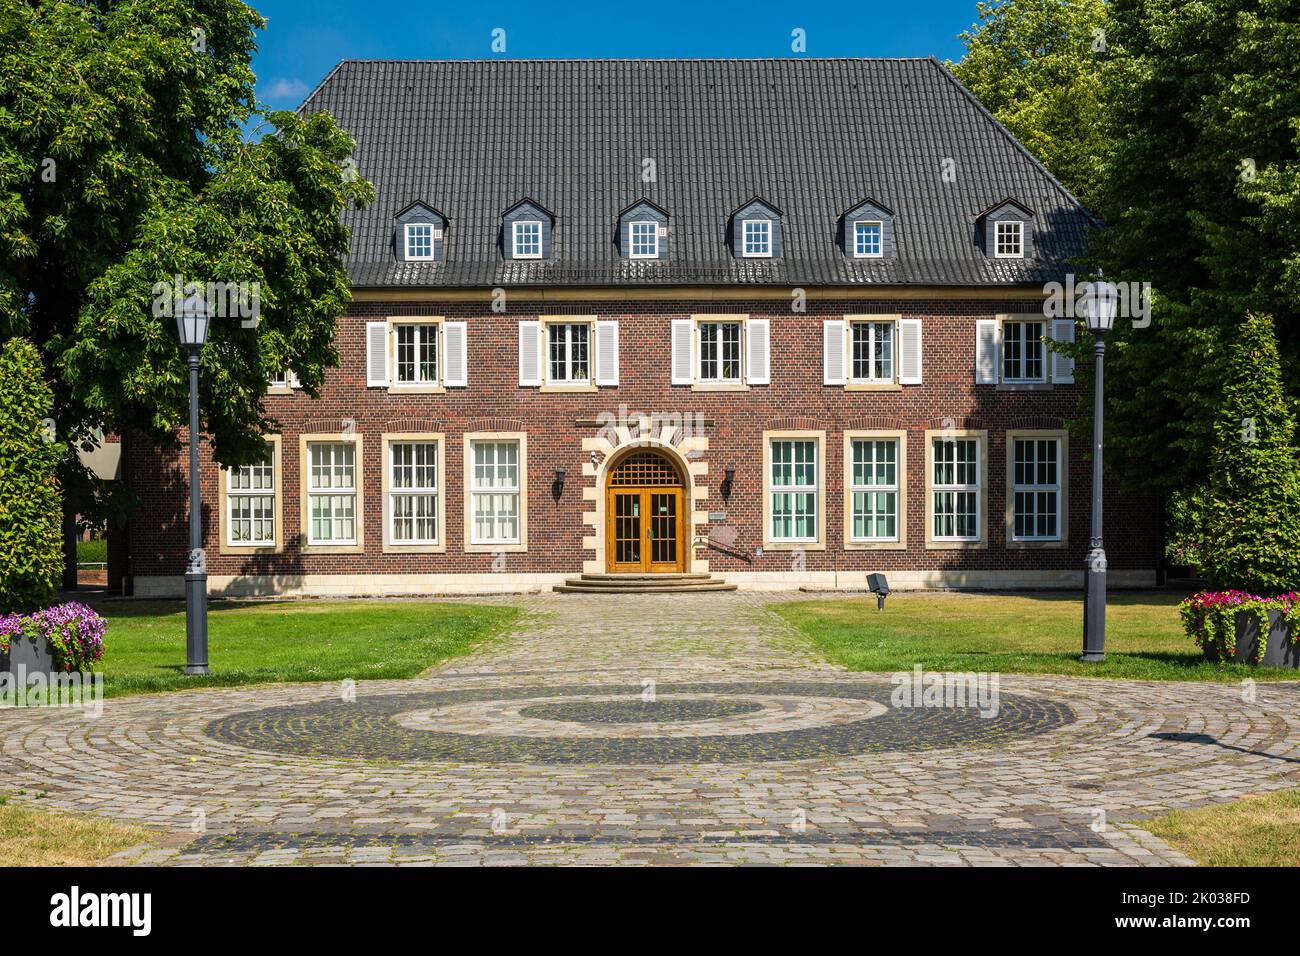 Germany, Ahaus, Westmuensterland, Muensterland, Westphalia, North Rhine-Westphalia, district court Ahaus at Suemmermannplatz in buildings of the outer castle of castle Ahaus, adjoining buildings Stock Photo